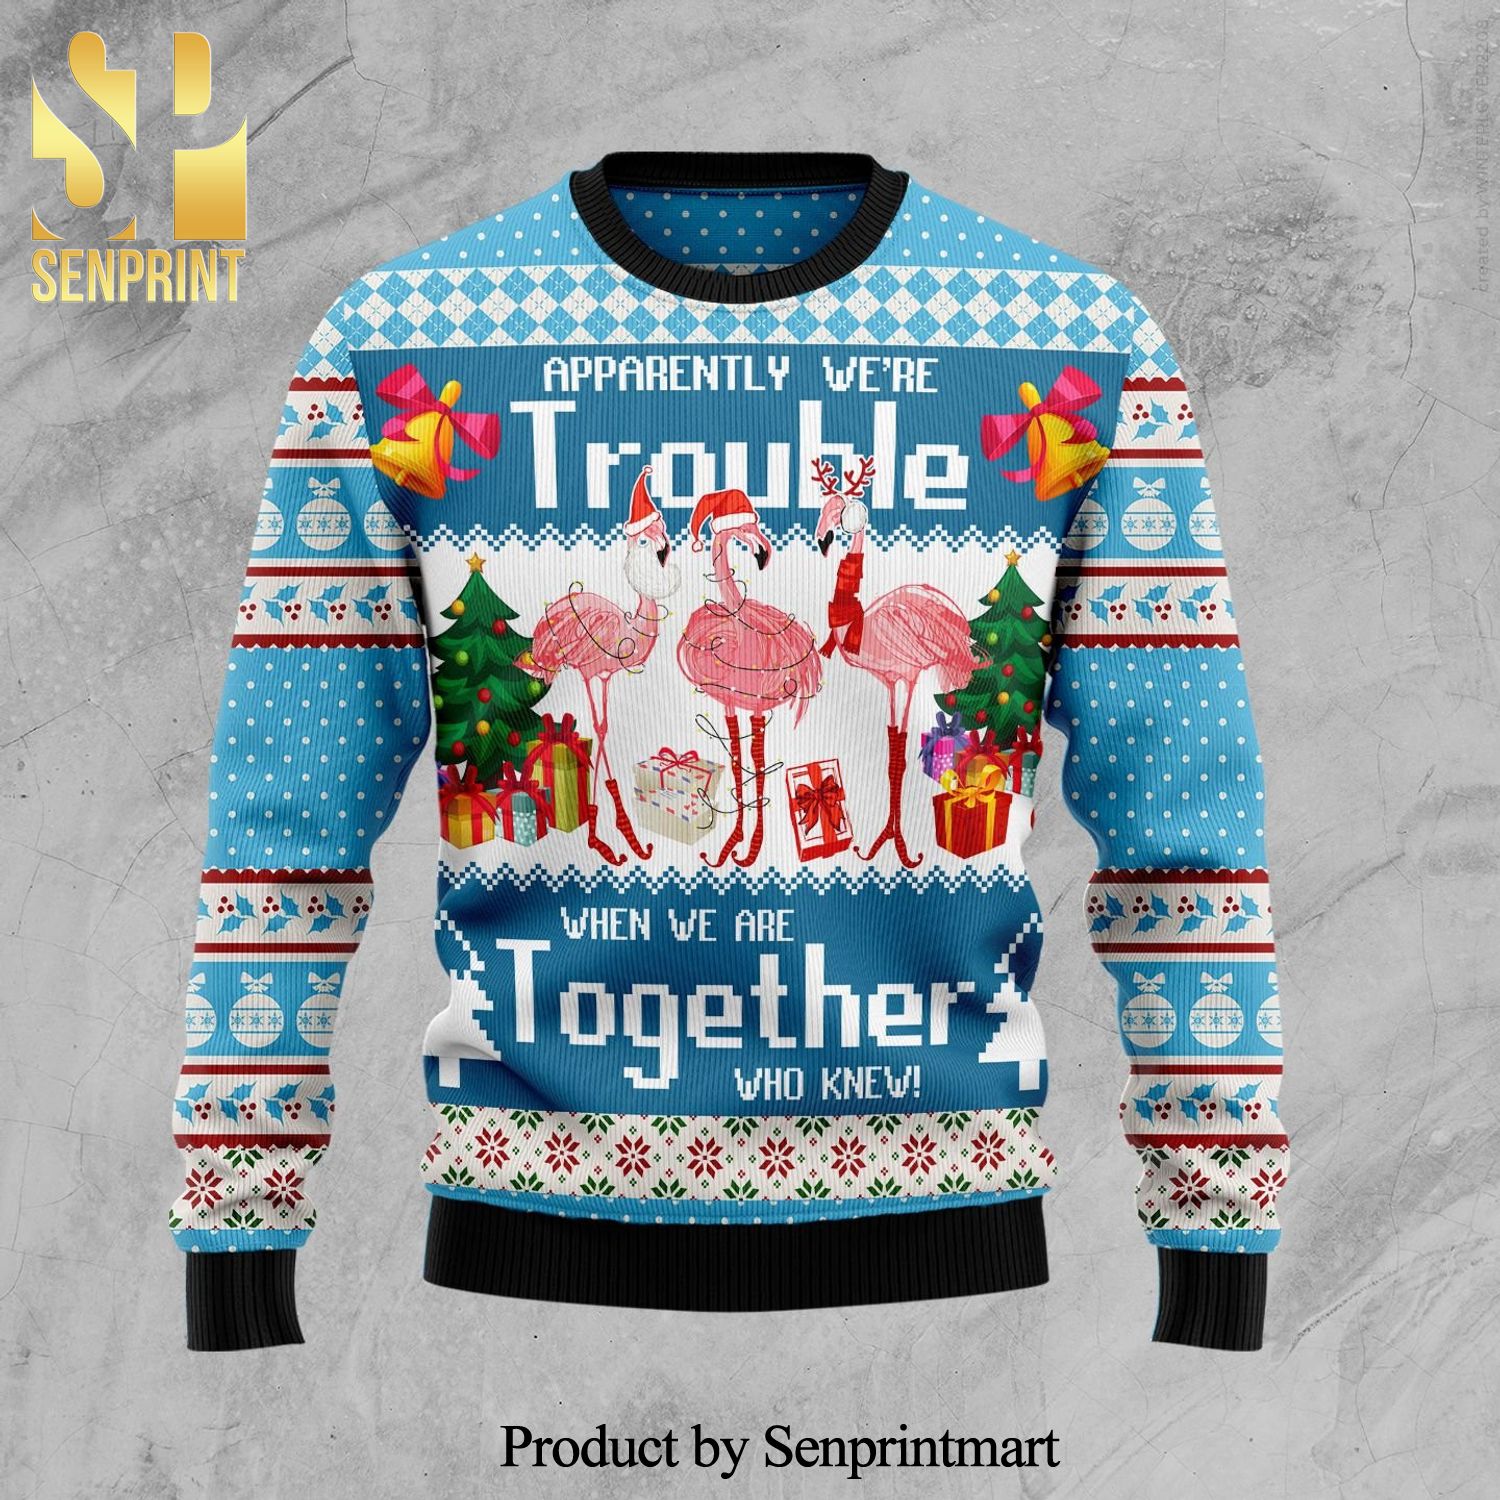 Apparently We’Re Trouble When We Are Together Who Knew Flamingo Knitted Ugly Christmas Sweater